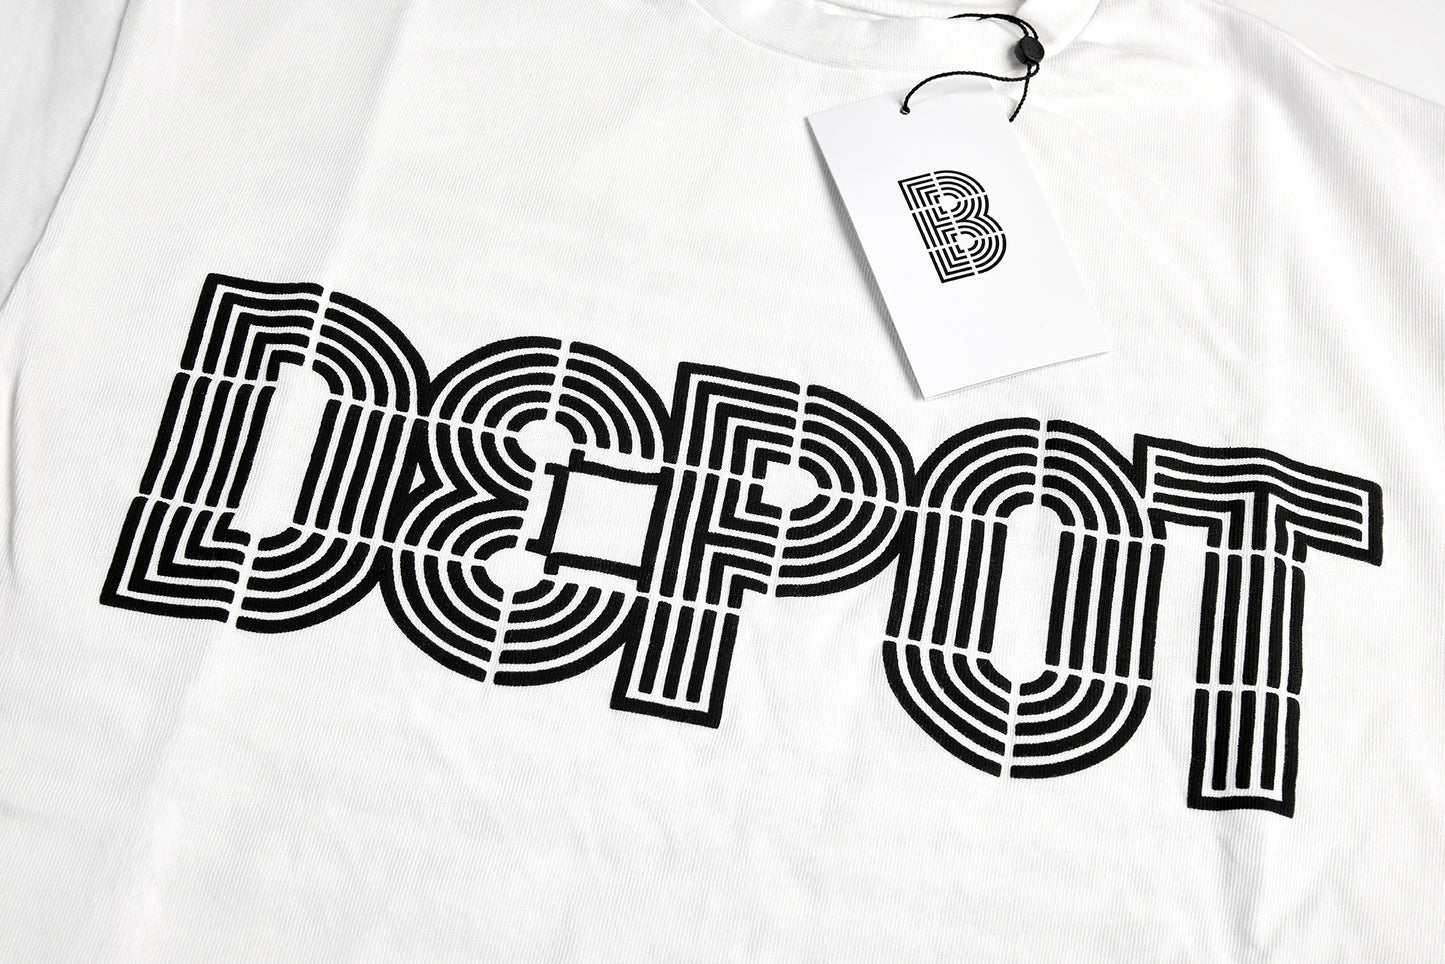 T-shirt Depot x Almost Not Done White